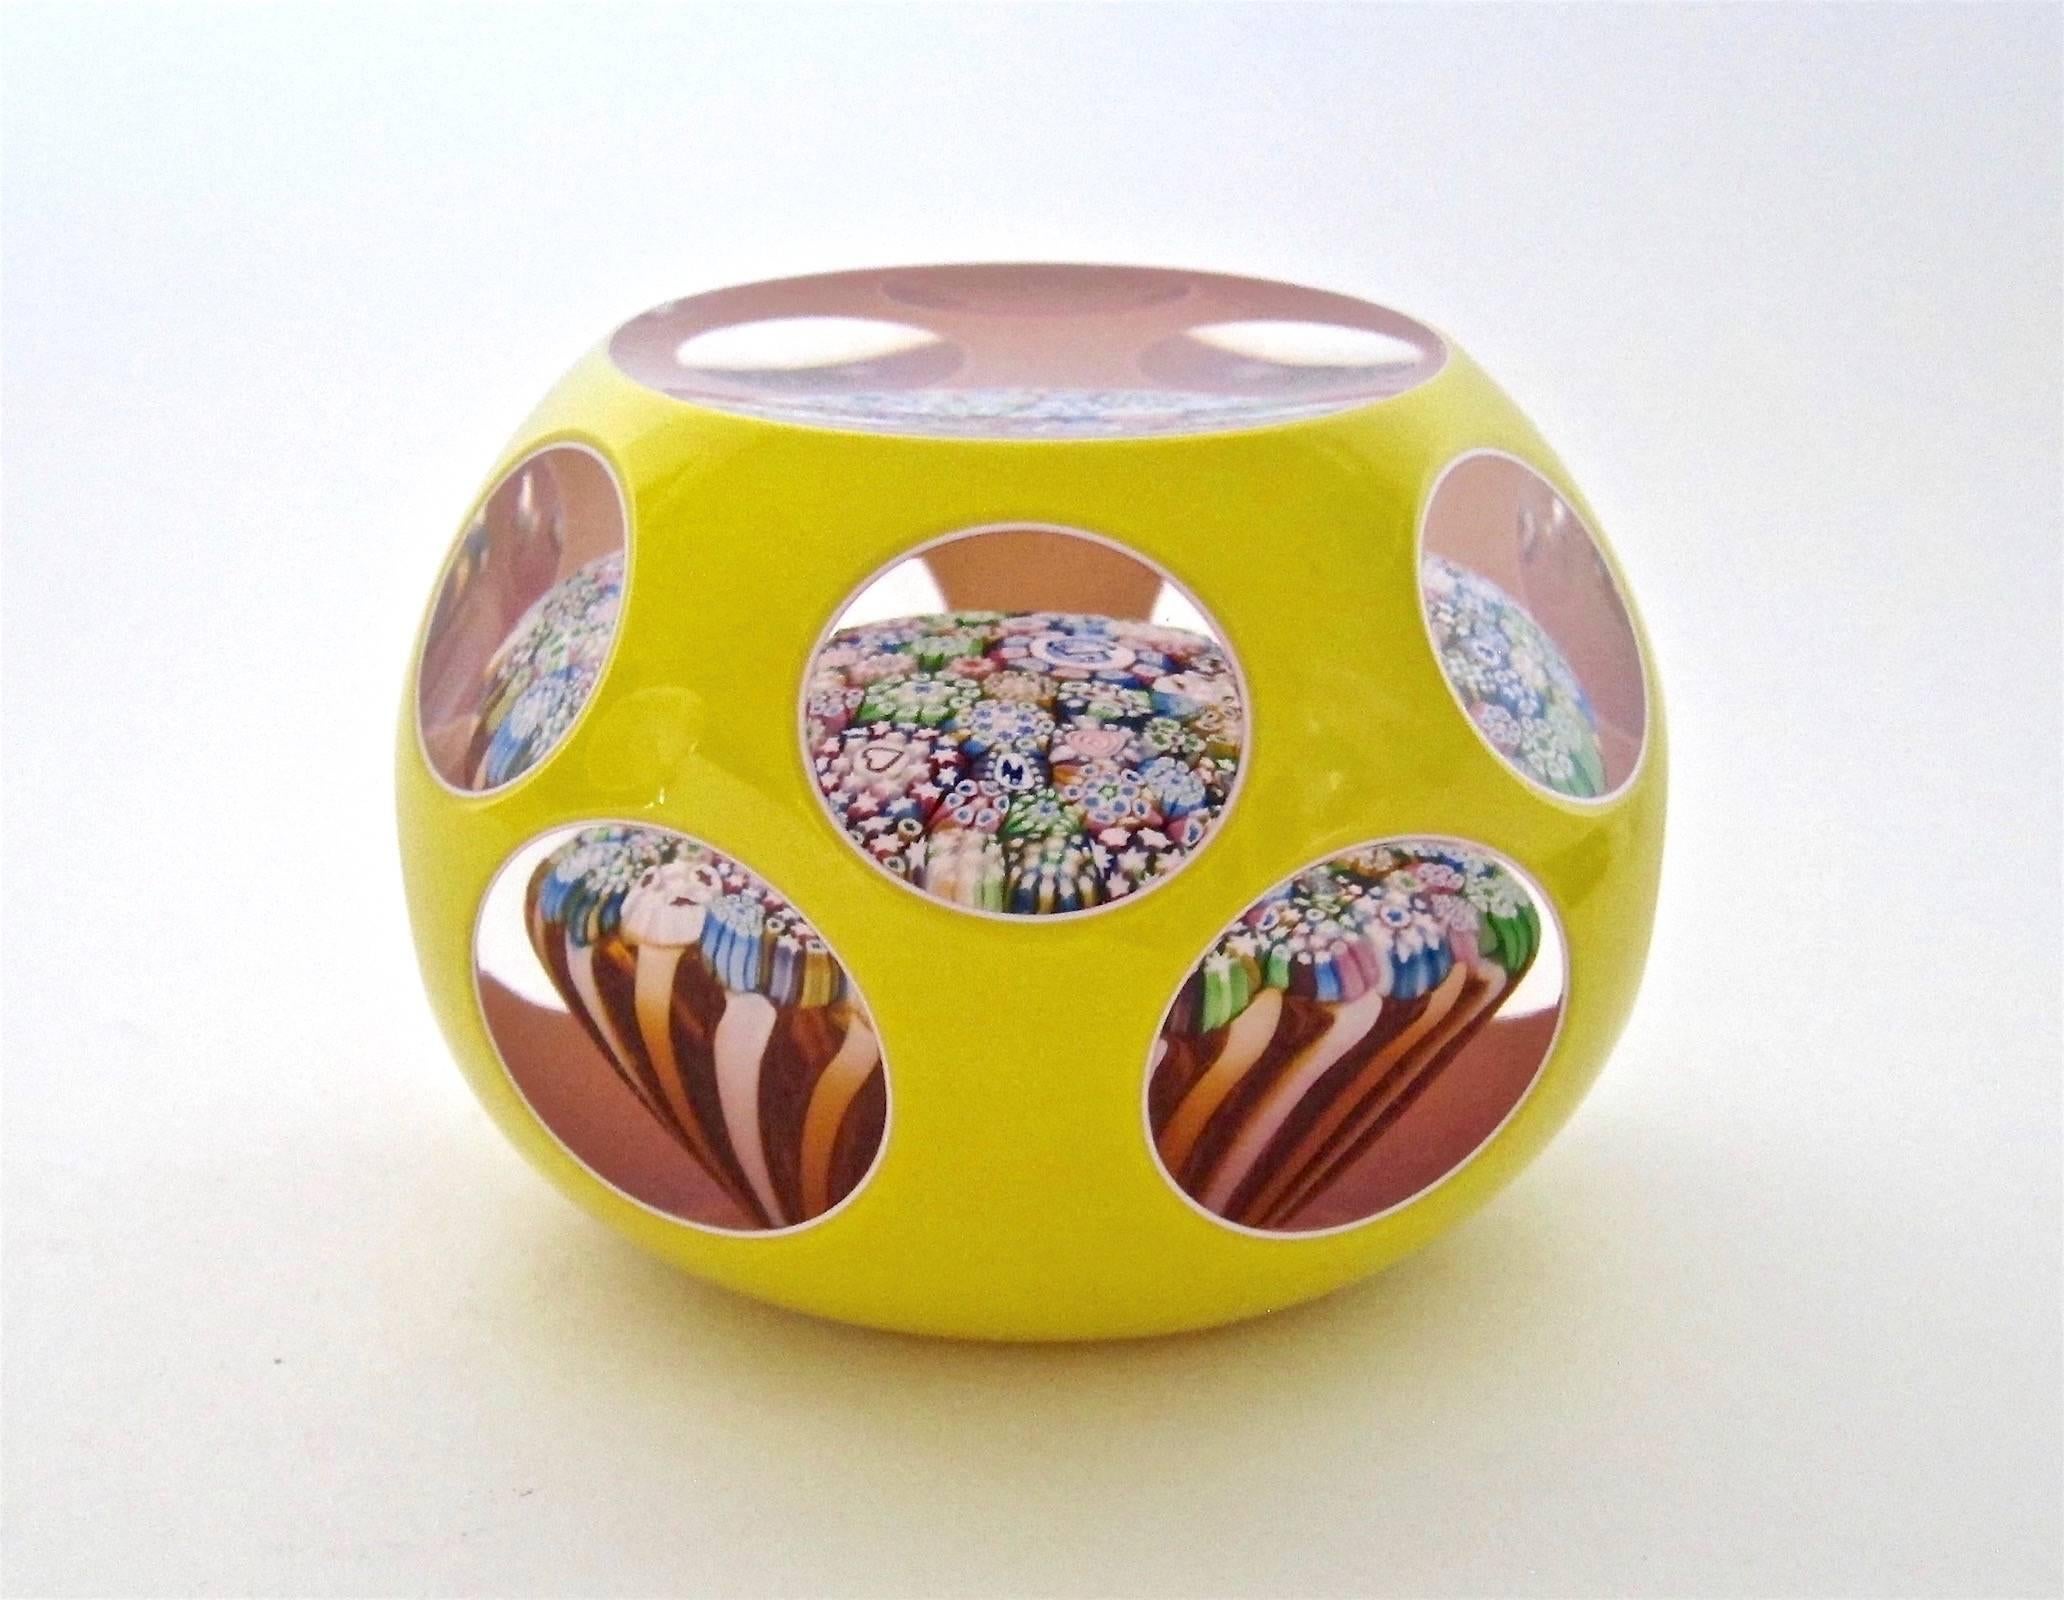 A handcrafted studio glass paperweight by John Deacons of Scotland, designed with a double overlay of bright yellow over white with cut round and oval facets. Closepack millefiori design with Silhouette canes including a rooster, bird and dog and a